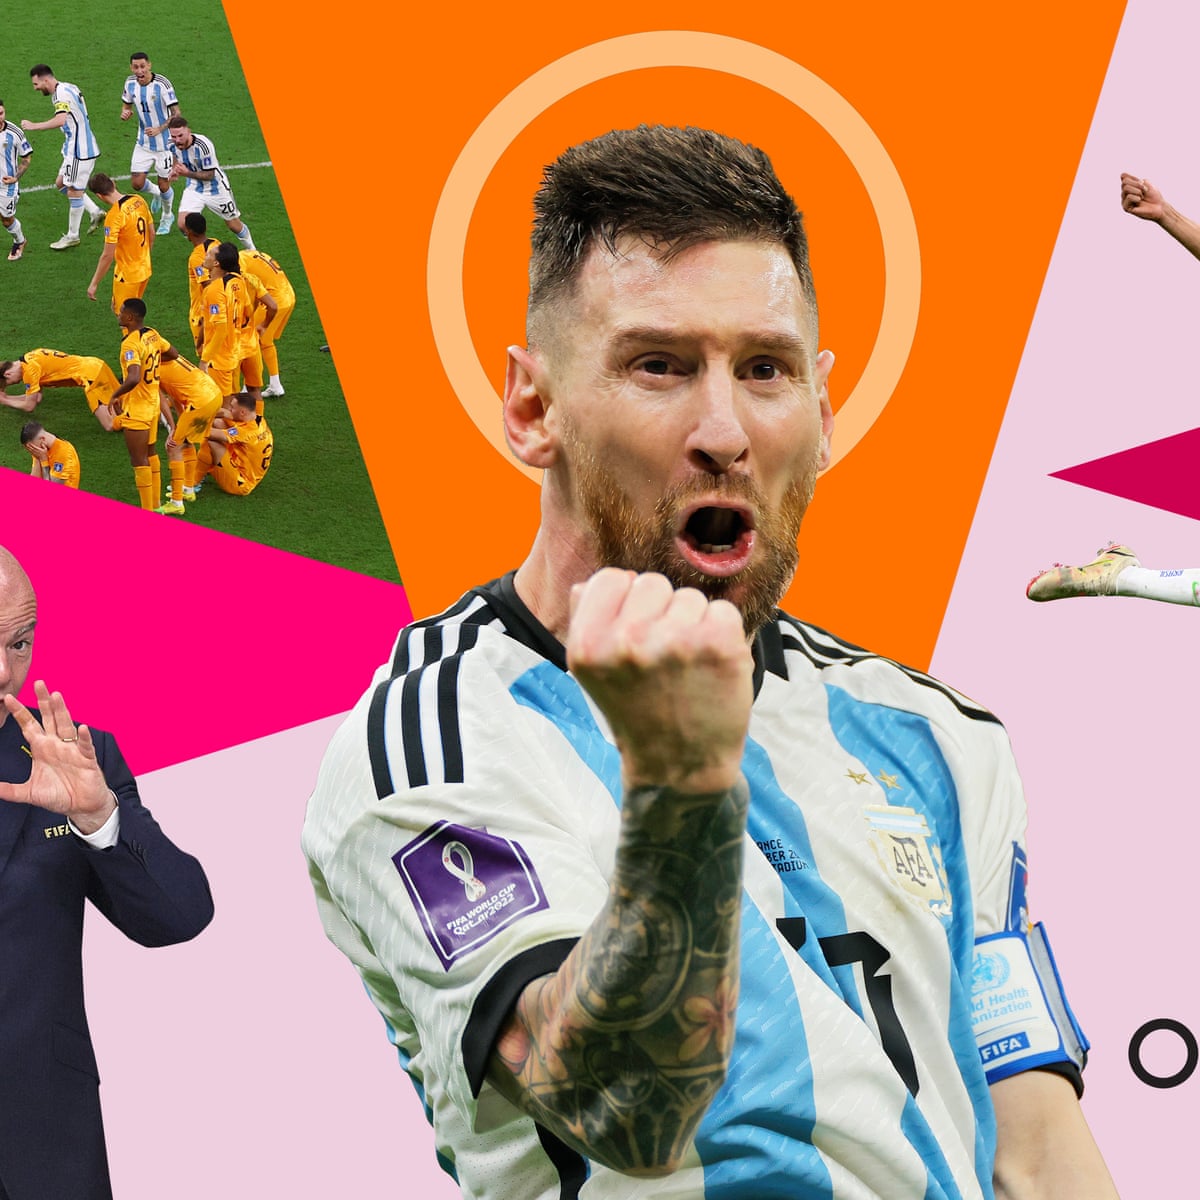 World Cup awards: the Guardian team at Qatar 2022 give their verdicts, World Cup 2022